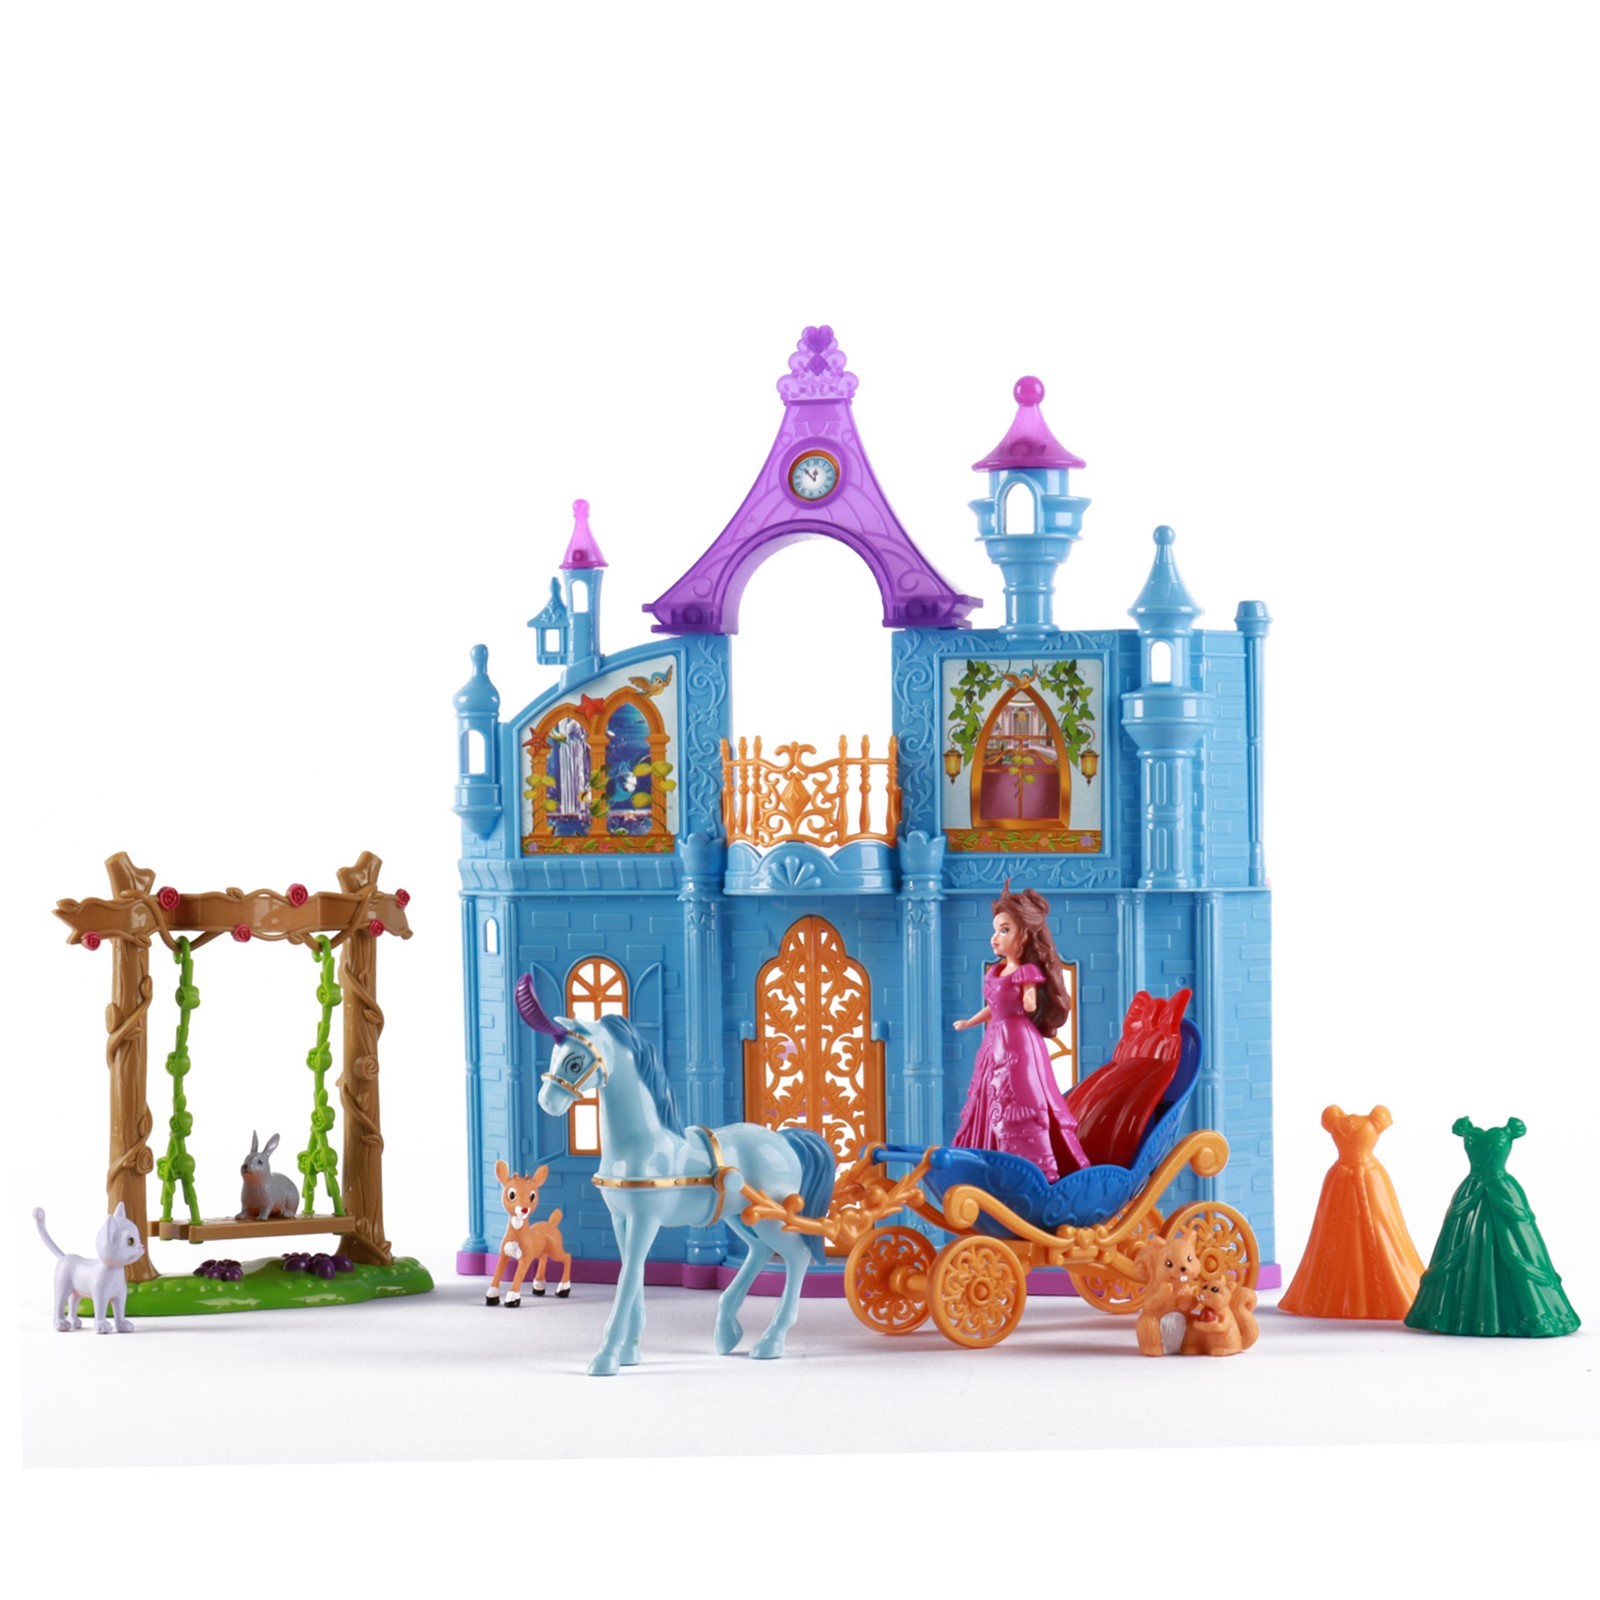 Princess Castle Deluxe Playset With Animal Friends Enchanted Swing Magical Horse And Carriage 3 Wardrobe Options Children's Pretend Play Perfect Early Learning Educational Preschool Girls Toys